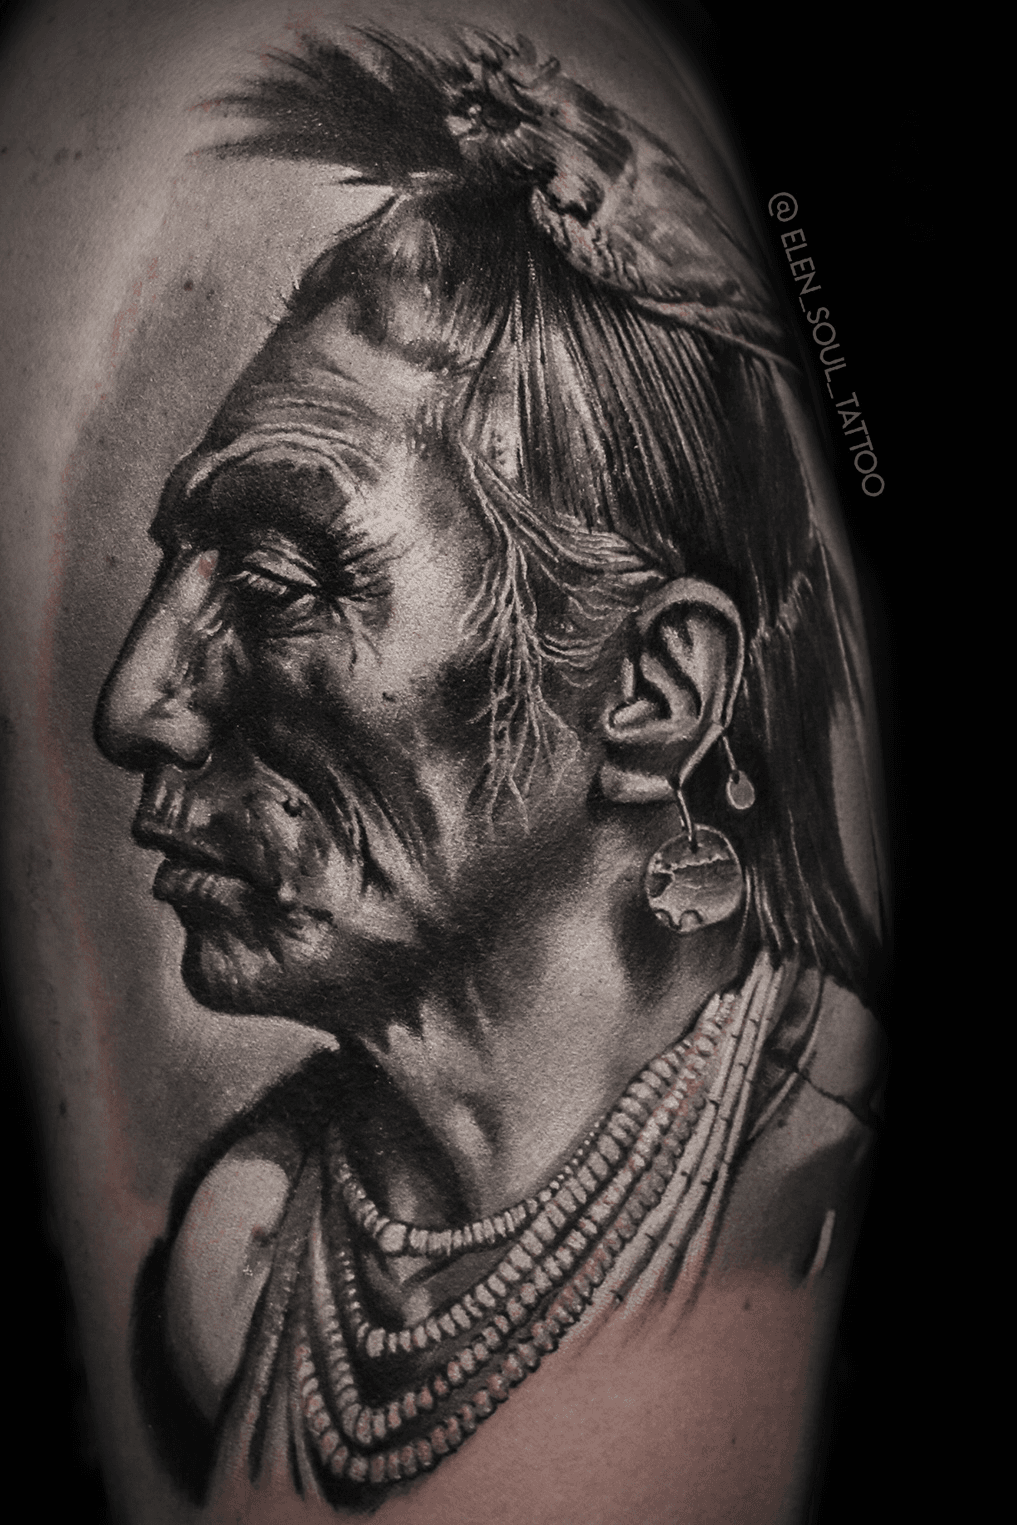 40 Native American Tattoo Designs that make you proud!